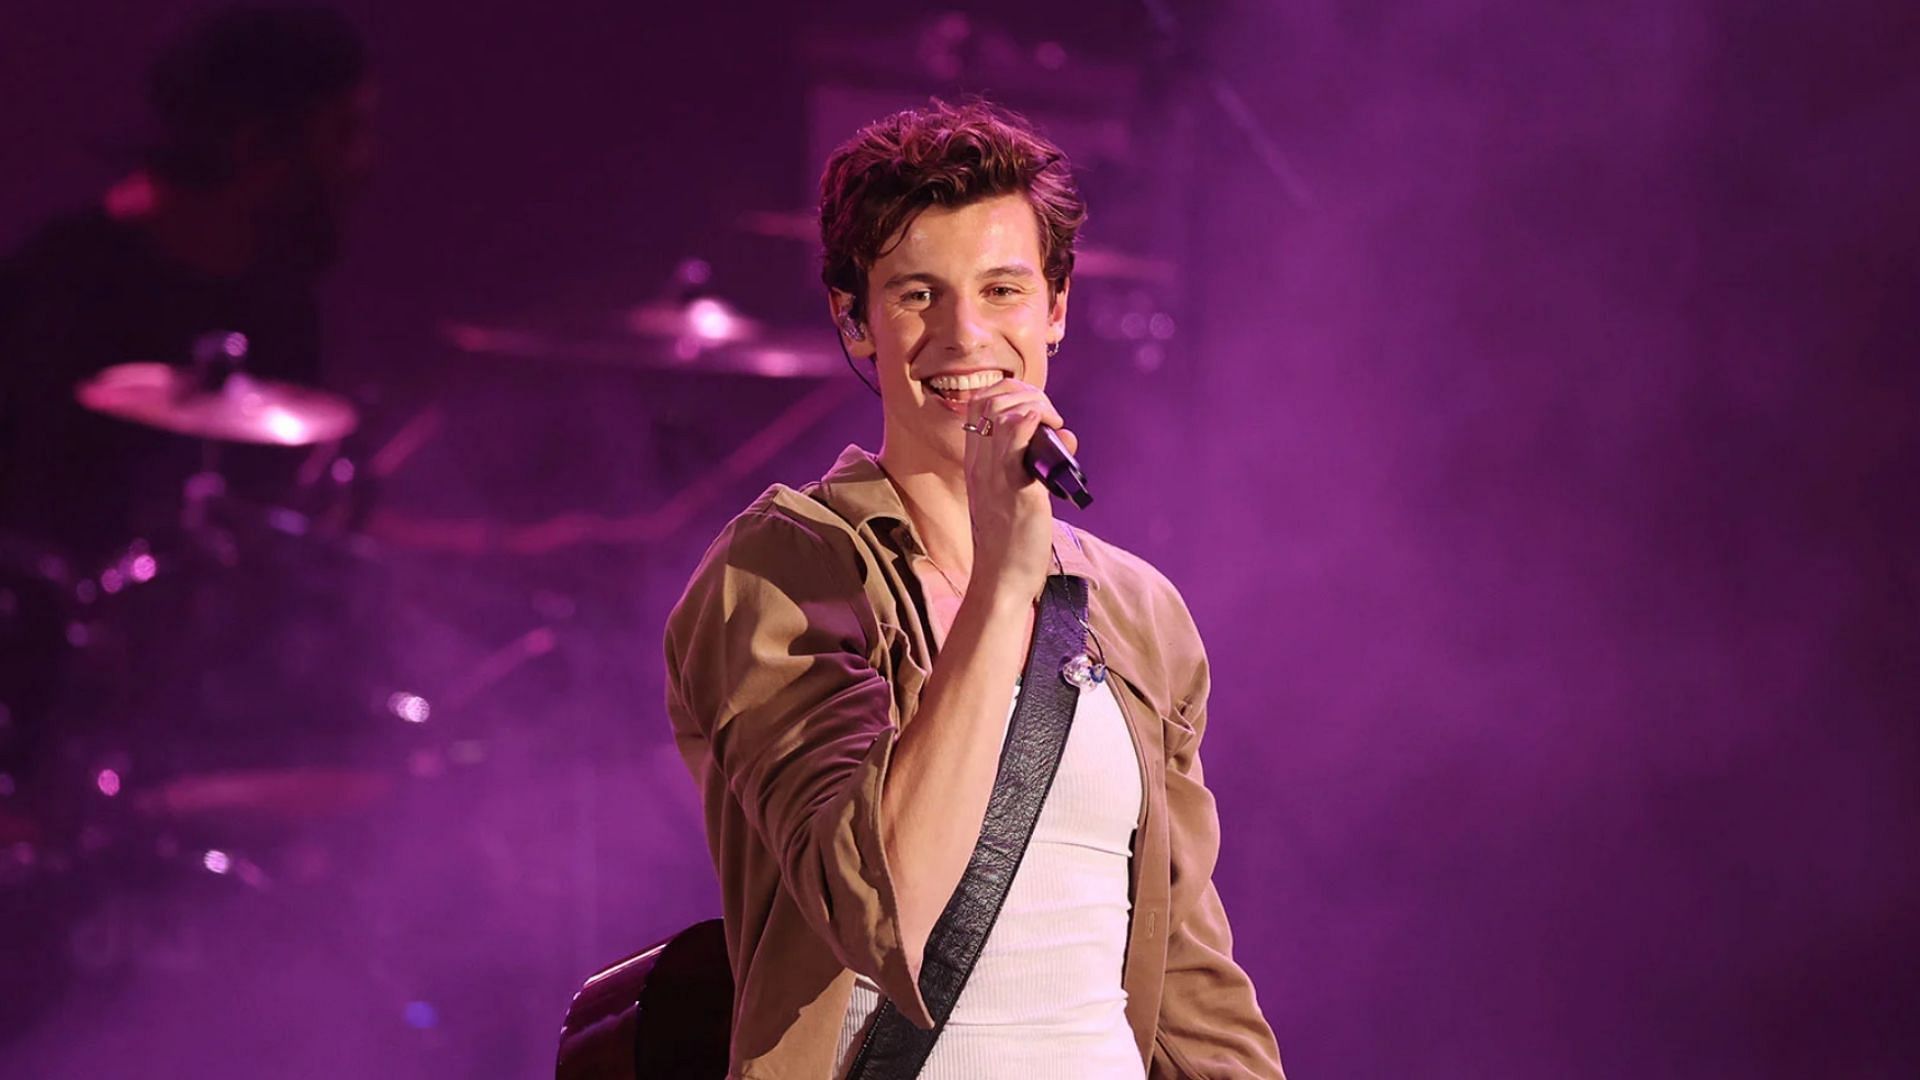 This June, Shawn Mendes will be hitting the road for his Wonder World Tour. (Image via Amy Sussman / Getty Images)